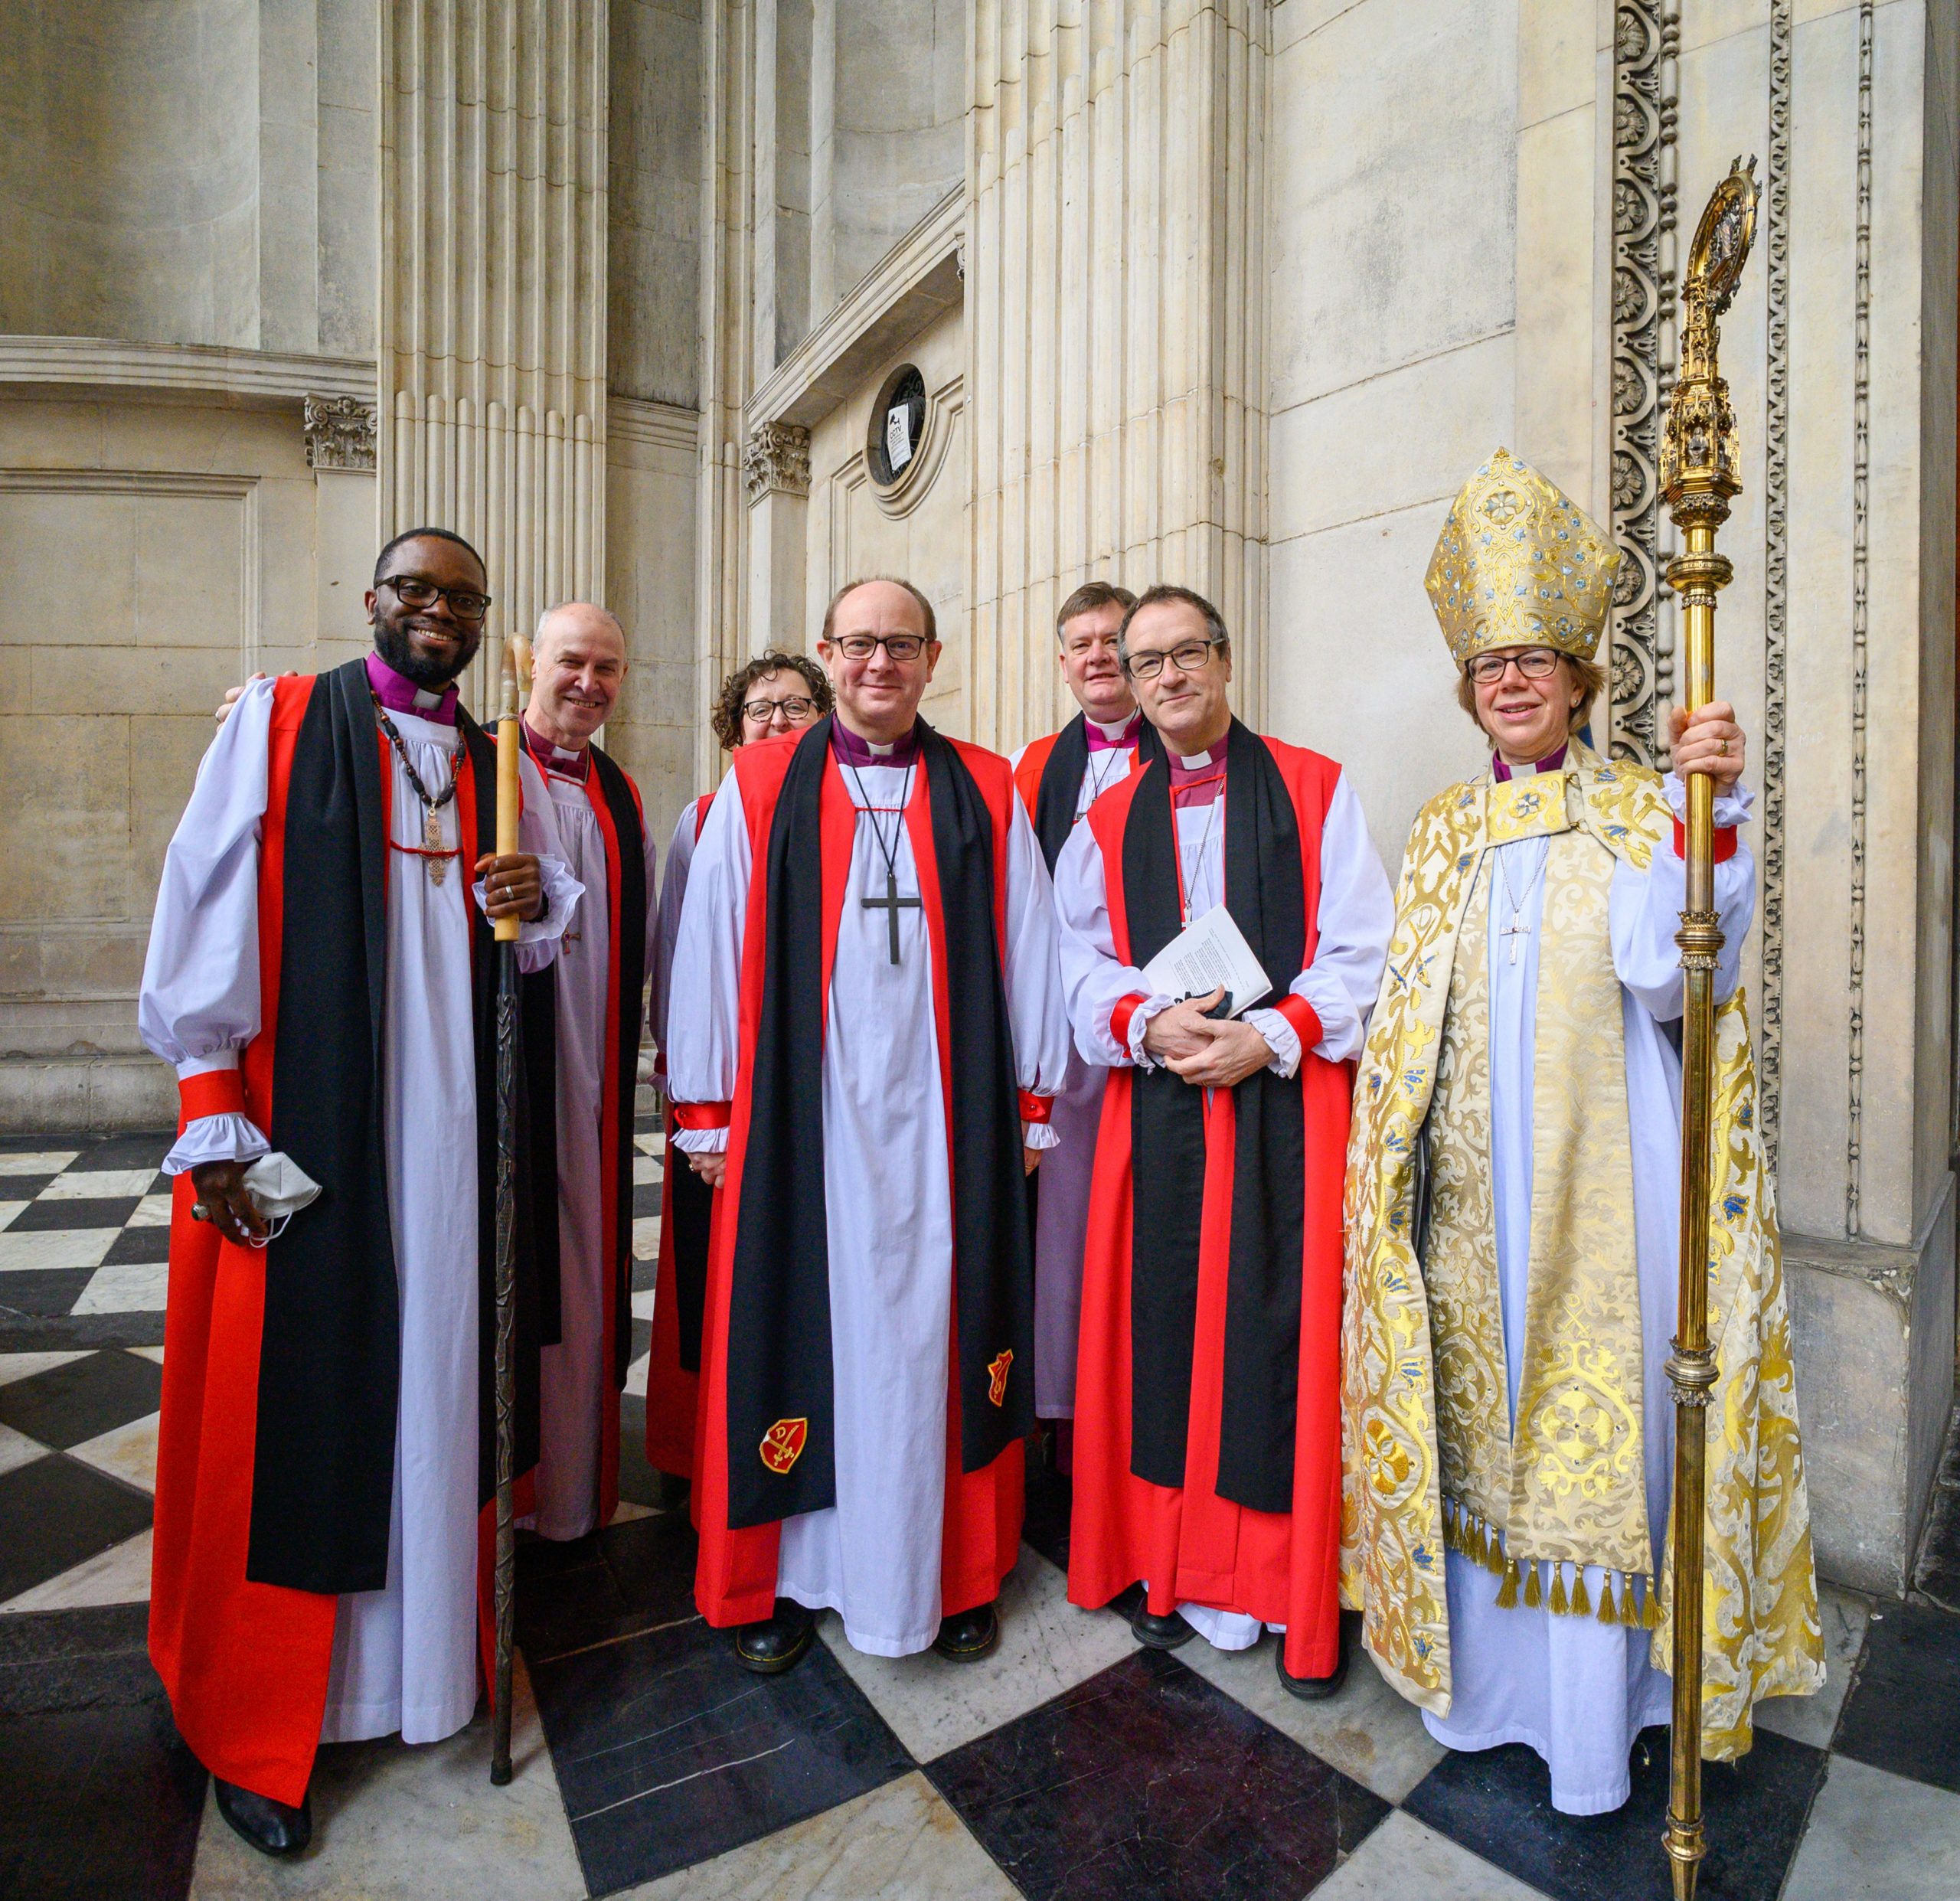 The Revd Canon Lusa Nsenga-Ngoy appointed the new Bishop of Willesden